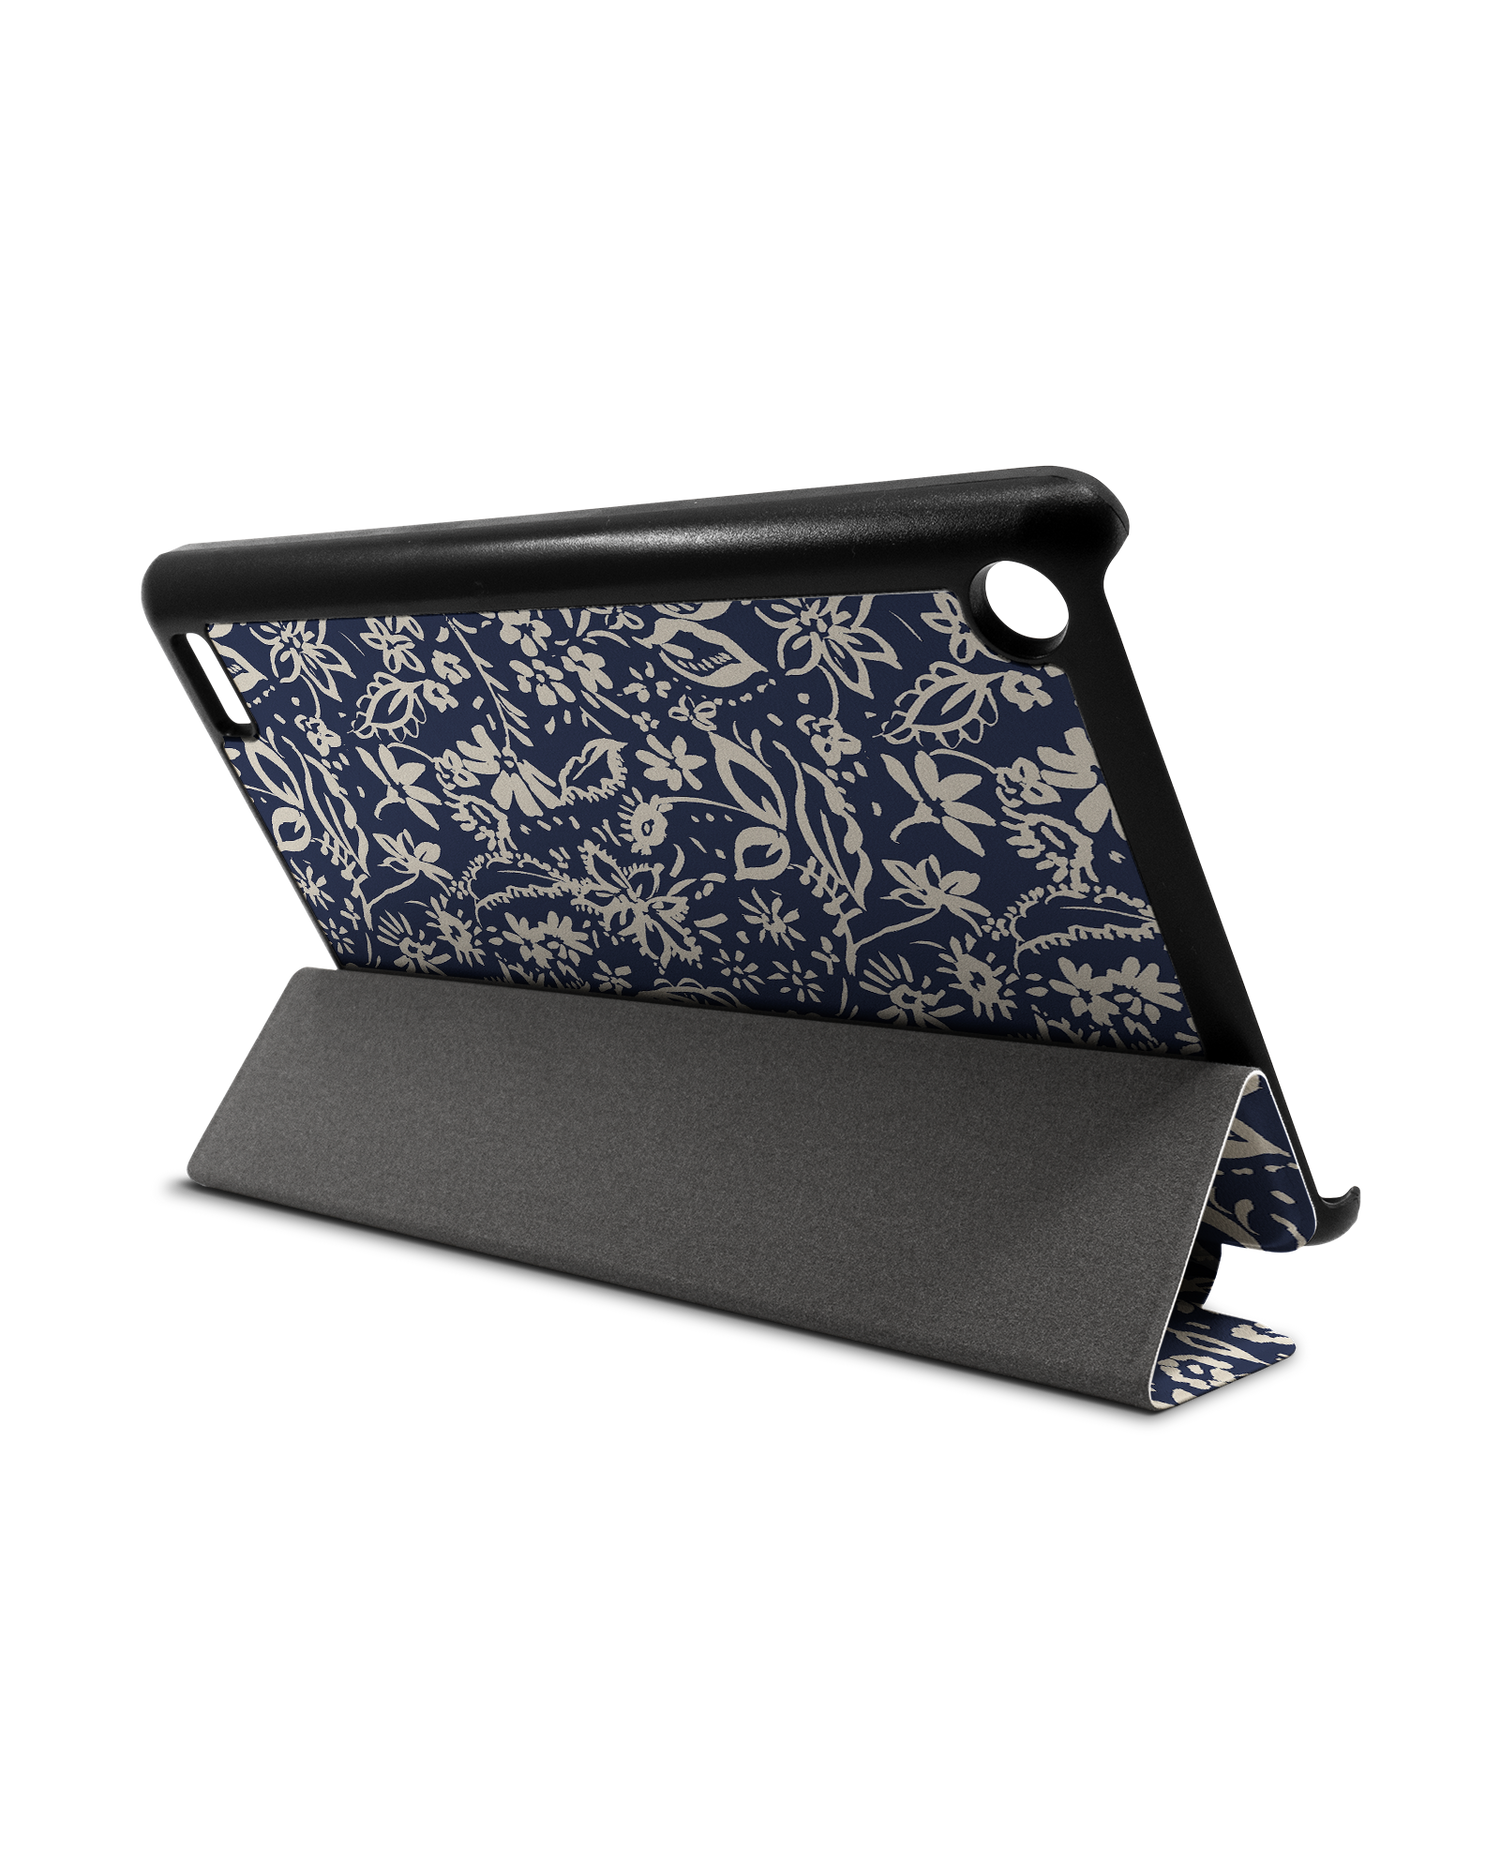 Ditsy Blue Paisley Tablet Smart Case for Amazon Fire 7: Used as Stand